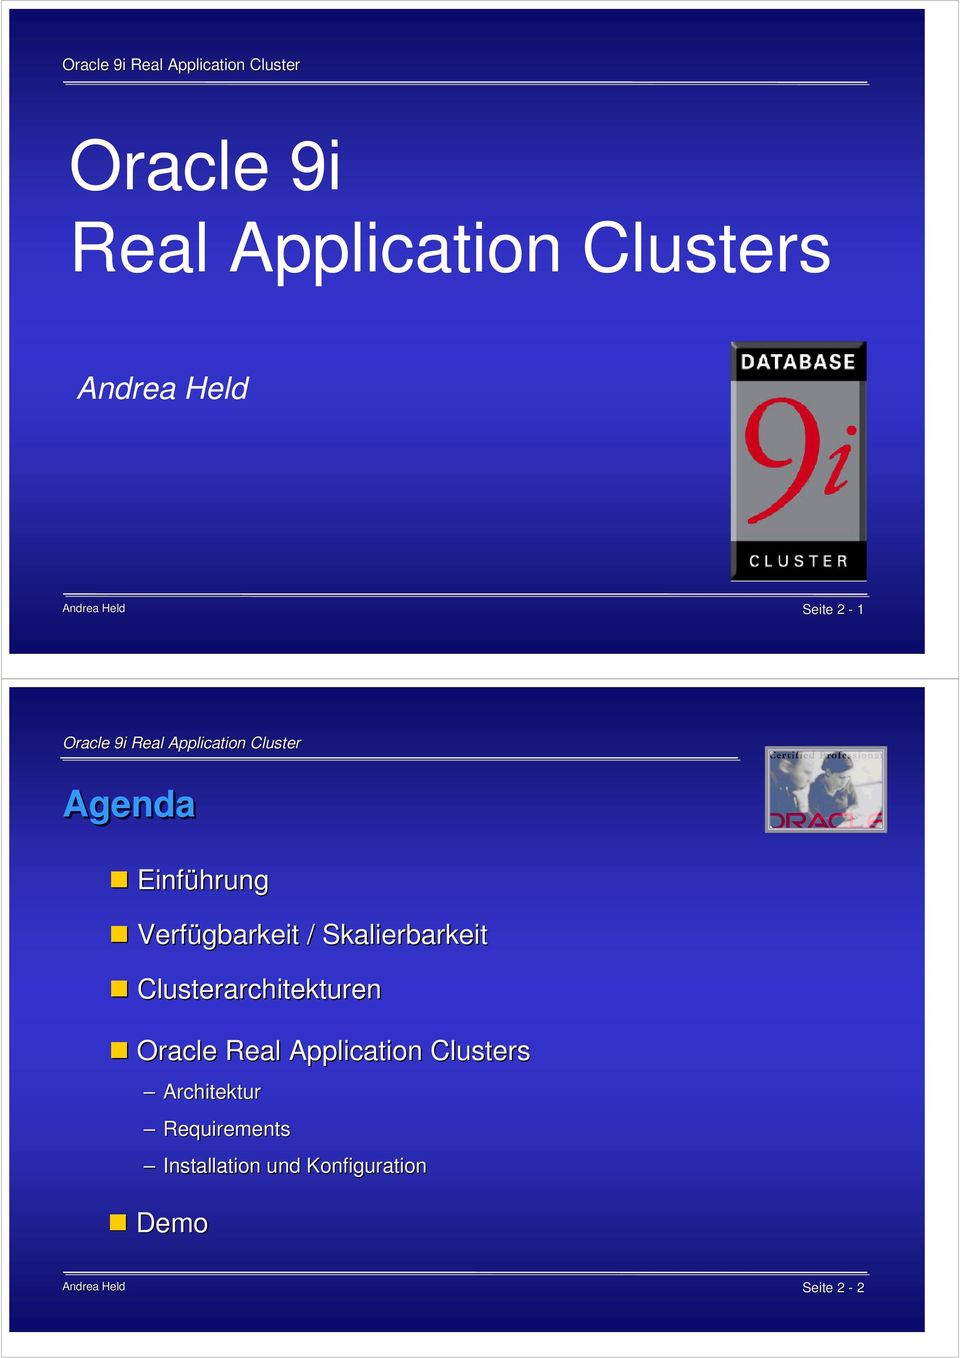 Clusterarchitekturen Oracle Real Application Clusters